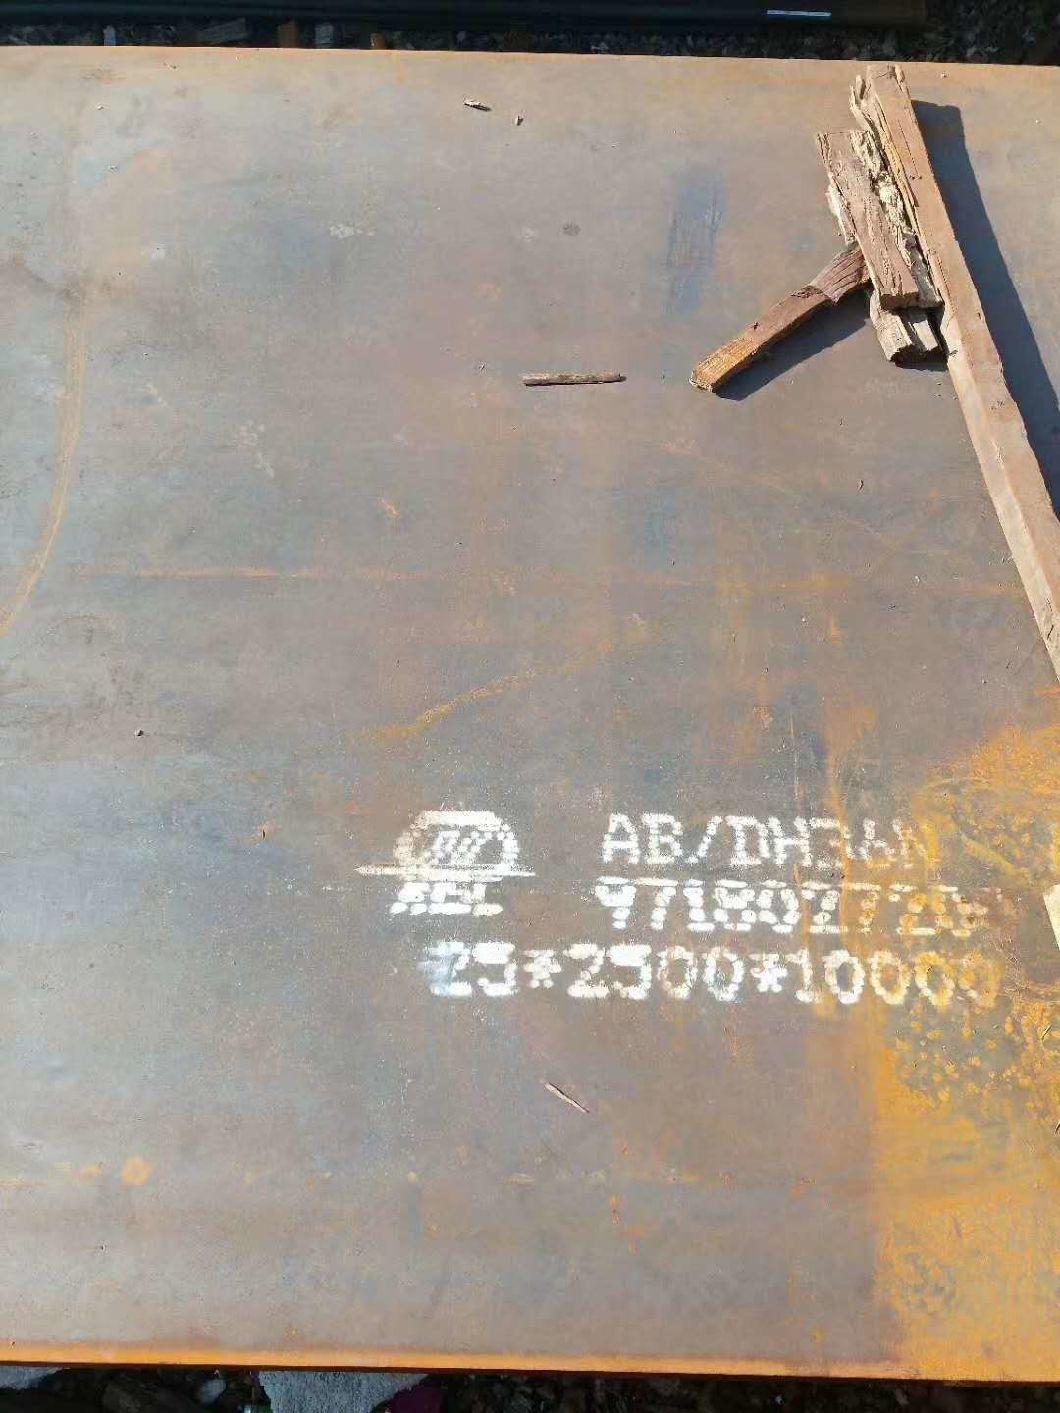 Ah36 Dh36 Eh36 Eh40 A36 Ship Steel Plate Ship Building Steel Plate A36